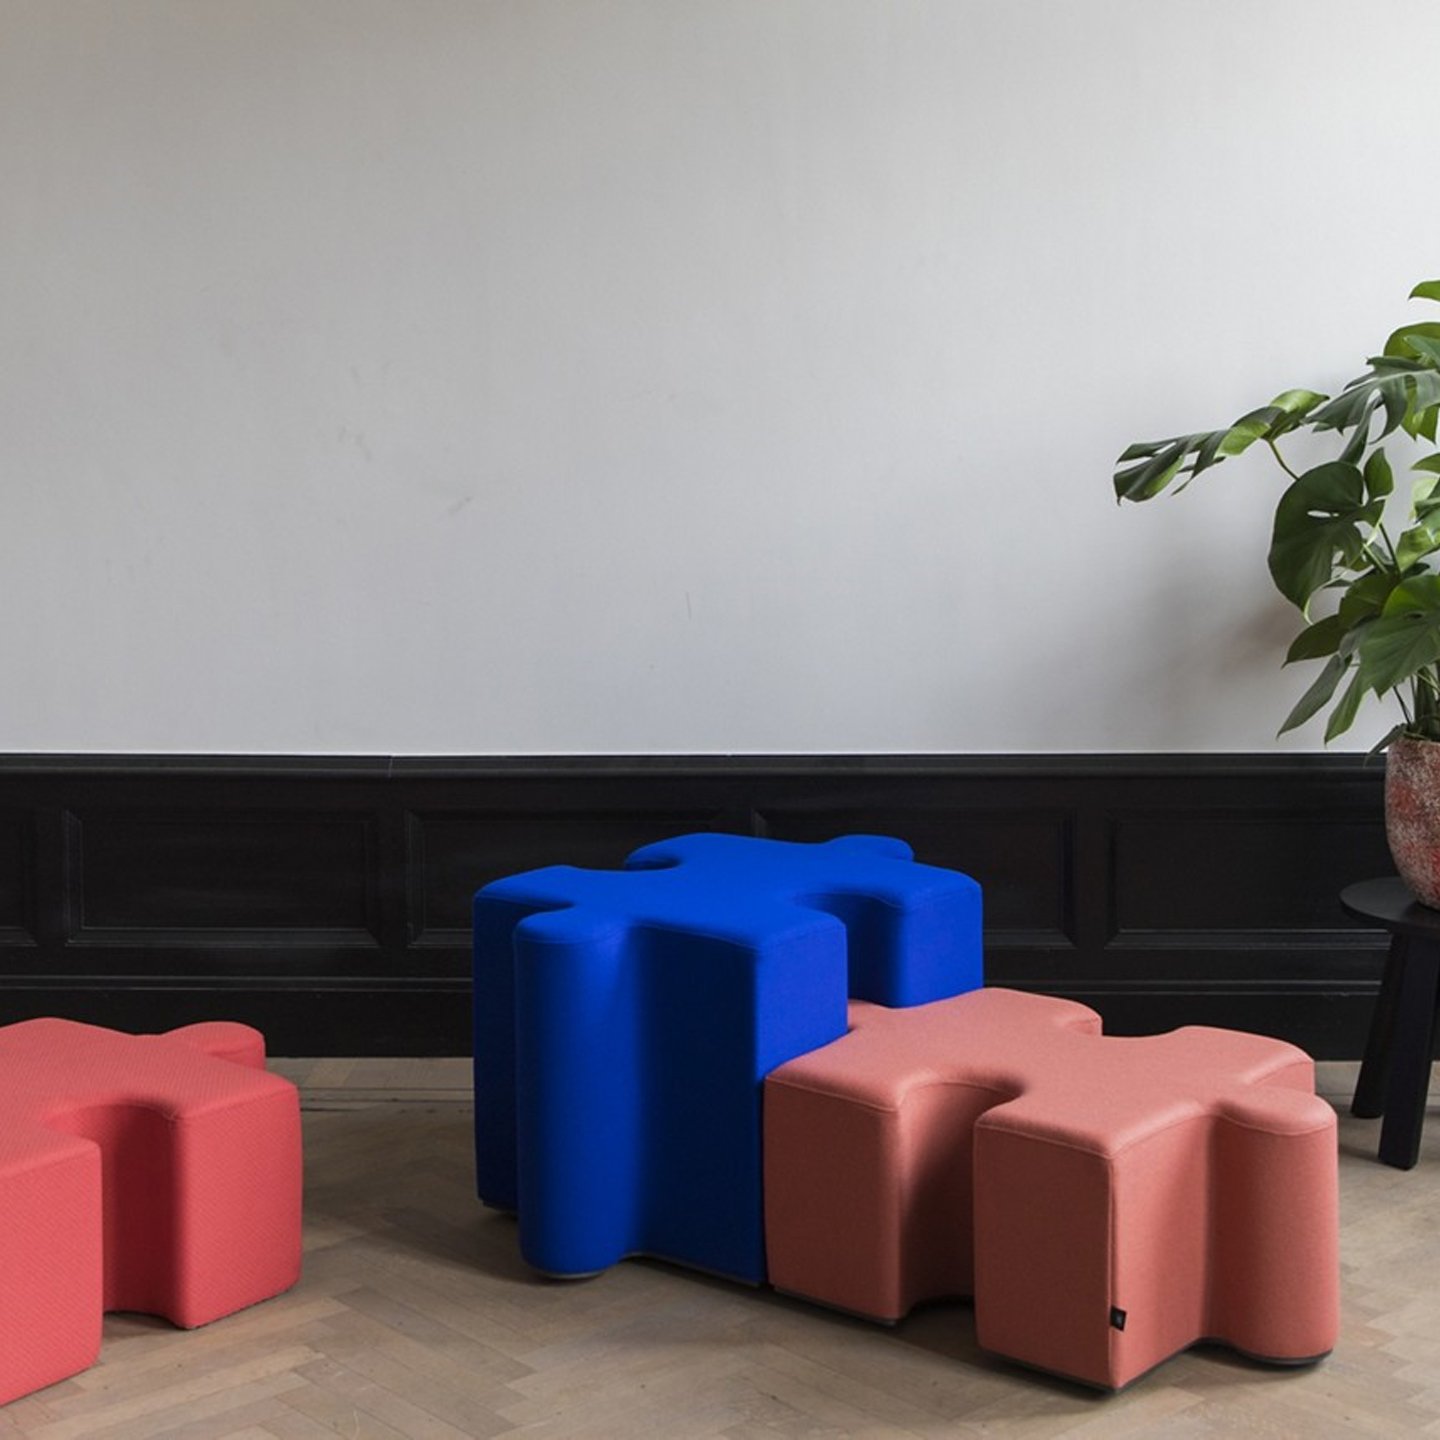 Haworth Buzzipuzzle poufs in red, pink and blue color in a jigsaw puzzle shape in a office lobby